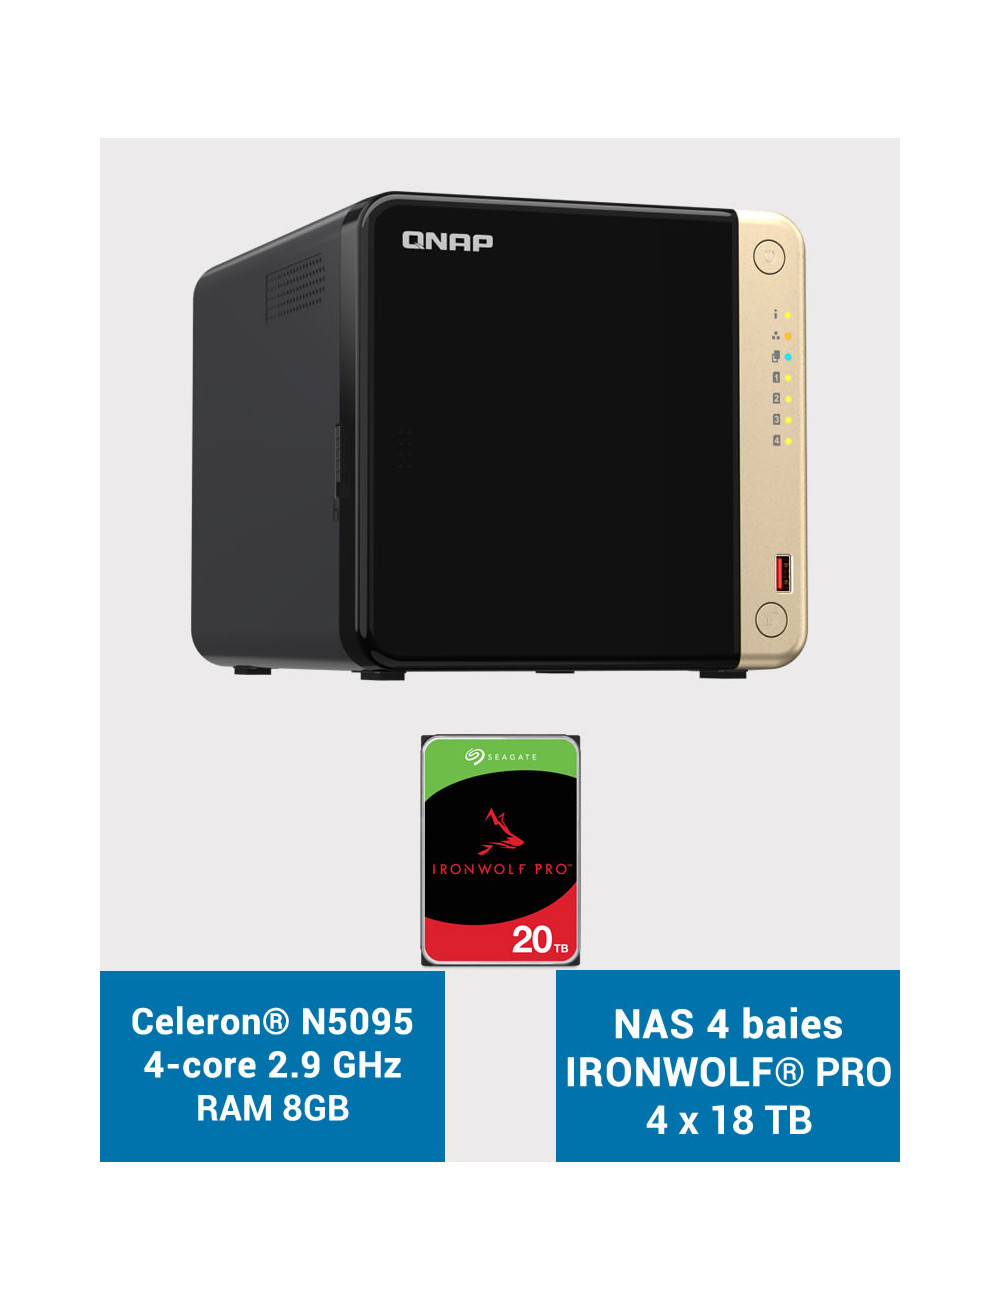 QNAP TS-464 8GB Serveur NAS 4 baies IRONWOLF PRO 80To (4x20To)